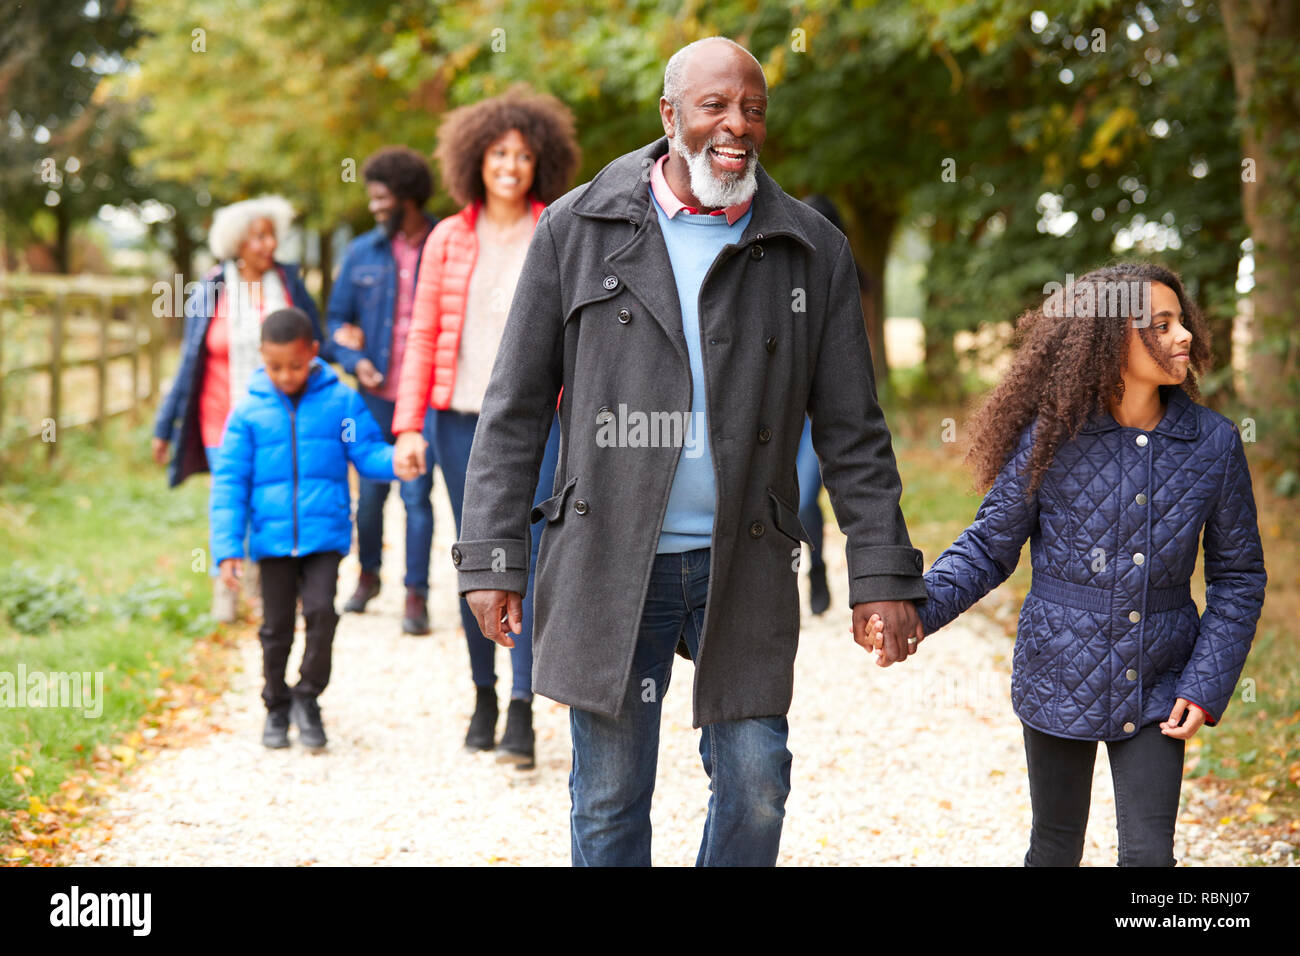 Multi Generation Family On Autumn Walk In Countryside Together Stock Photo